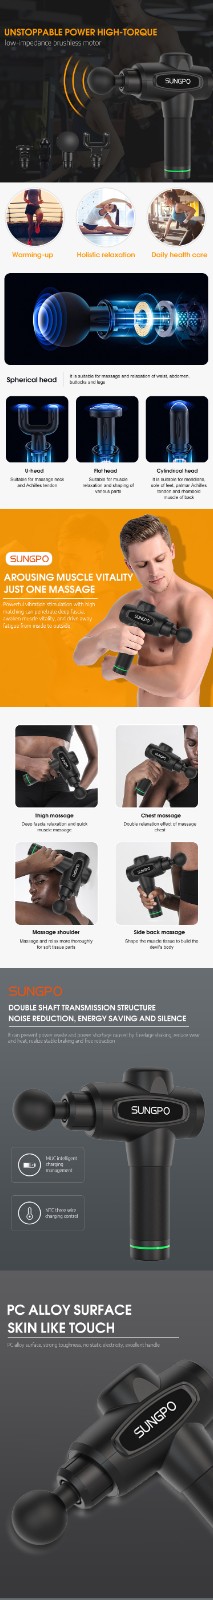 SUNGPO smart massage gun with good price for exercise-2